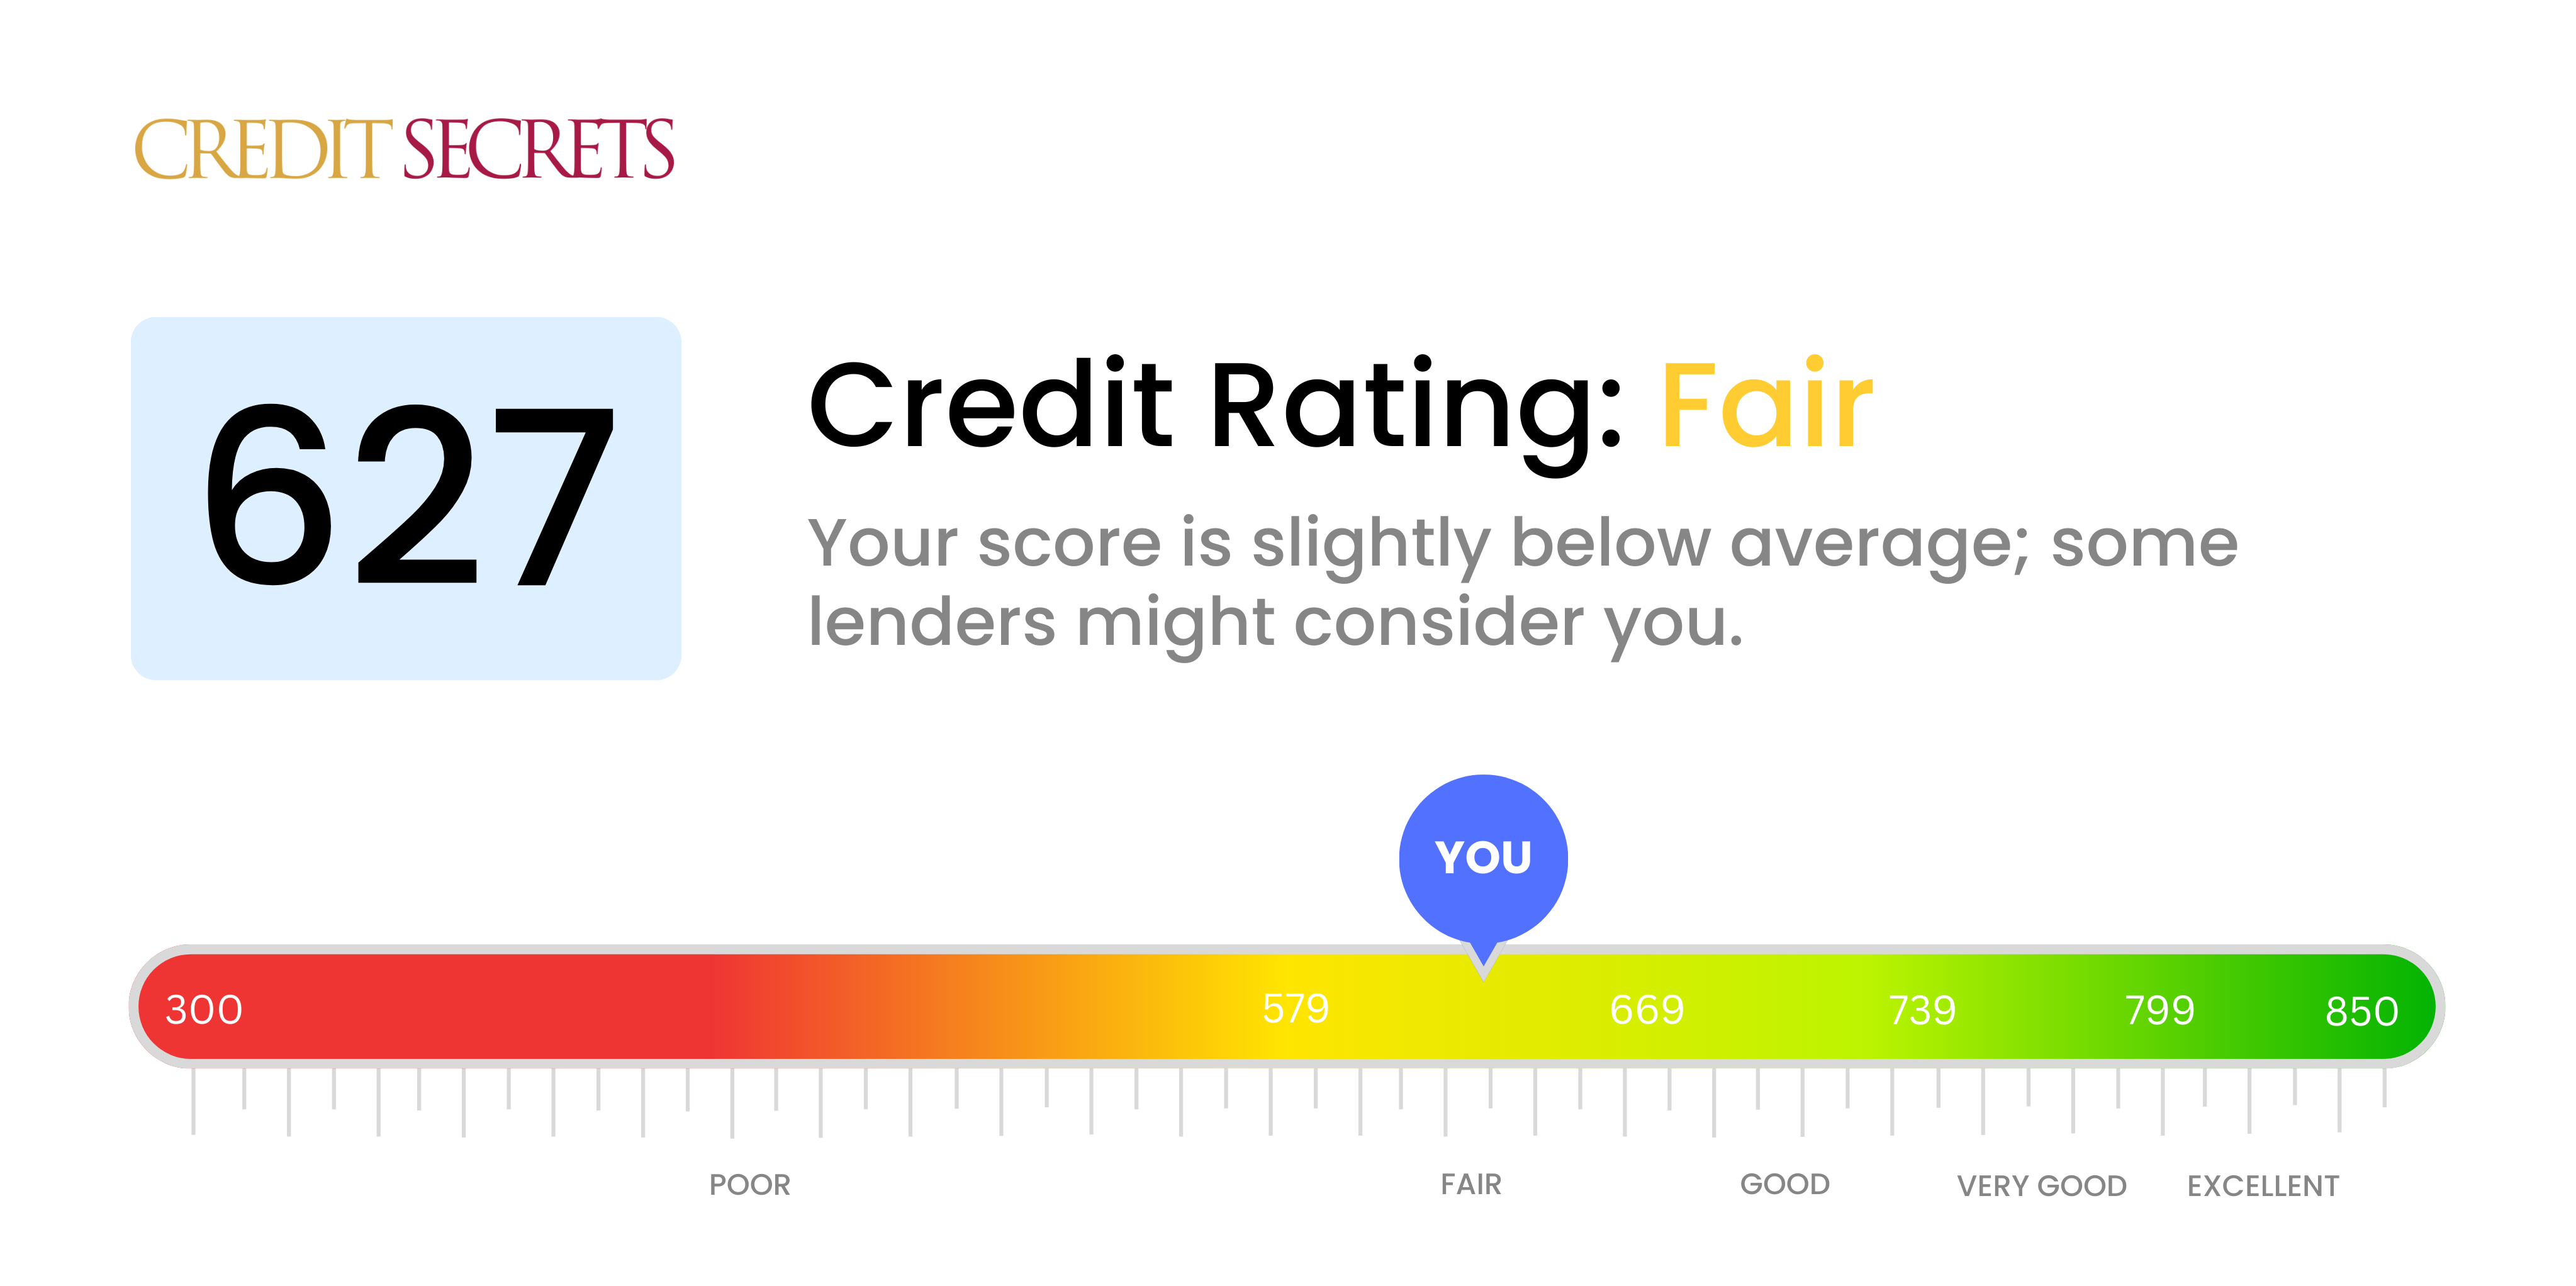 Is 627 a good credit score?